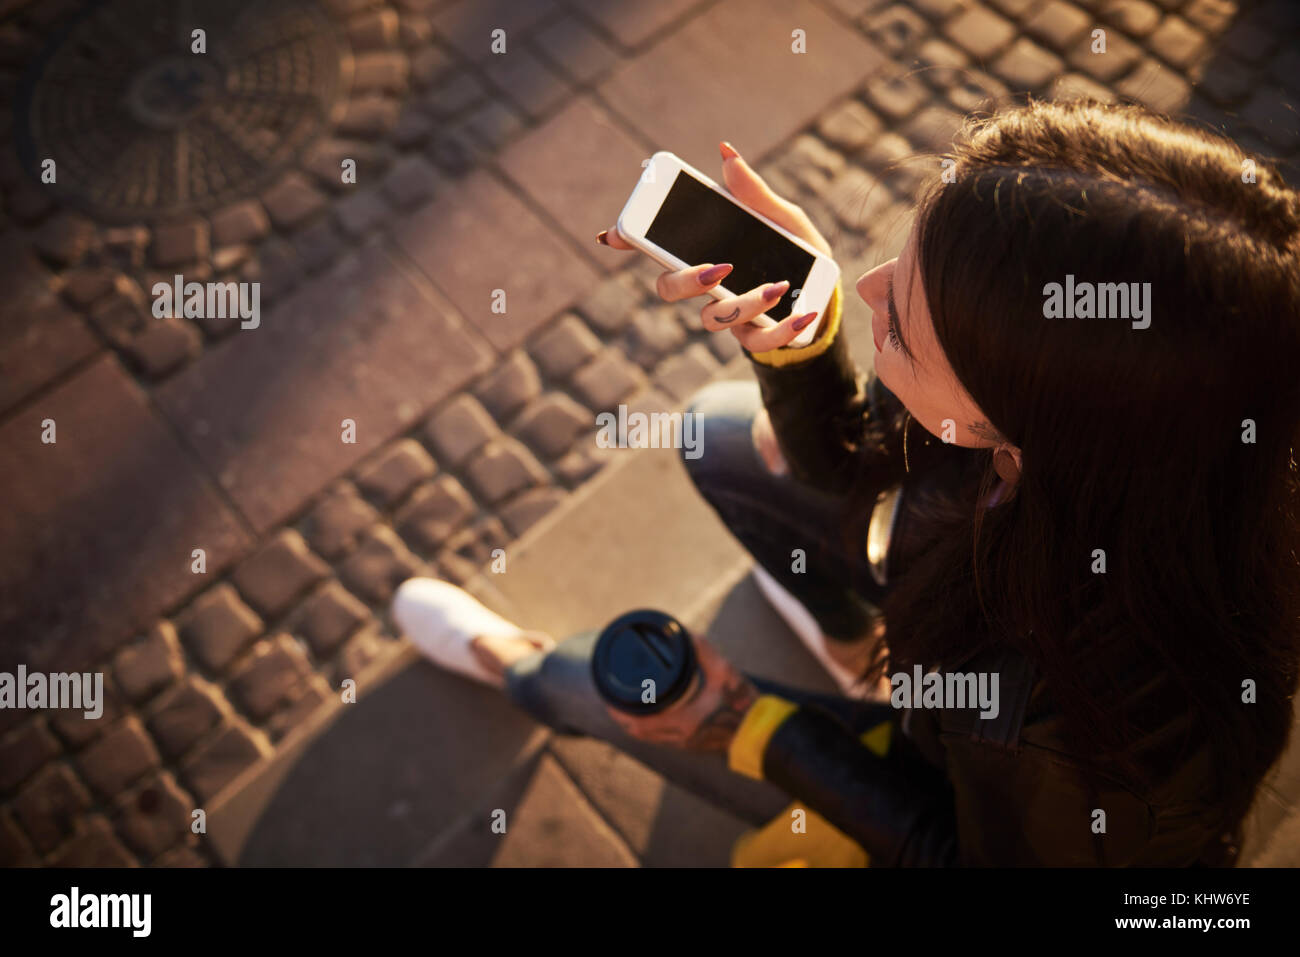 Young woman sitting outdoors, holding coffee cup, using smartphone, tattoos on hands, elevated view Stock Photo